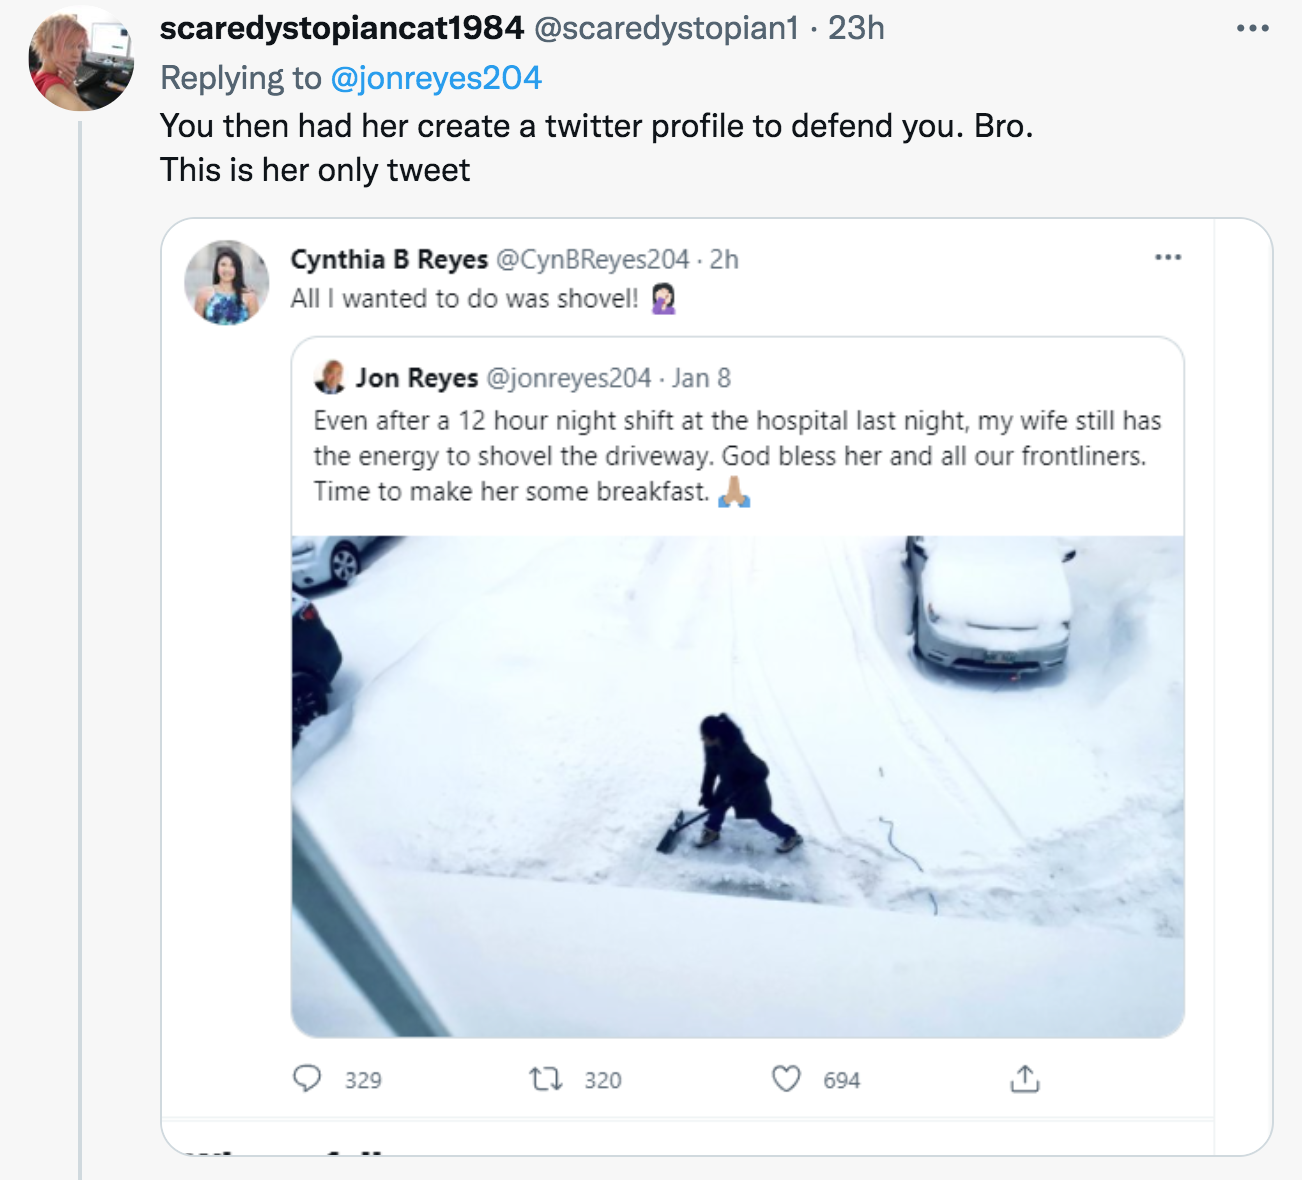 Husband Roasts For Snow Shoveling Tweet - media - scaredystopiancat1984 . 23h You then had her create a twitter profile to defend you. Bro. This is her only tweet Cynthia B Reyes .2h All I wanted to do was shovella Jon Reyes Jan 8 Even after a 12 hour nig